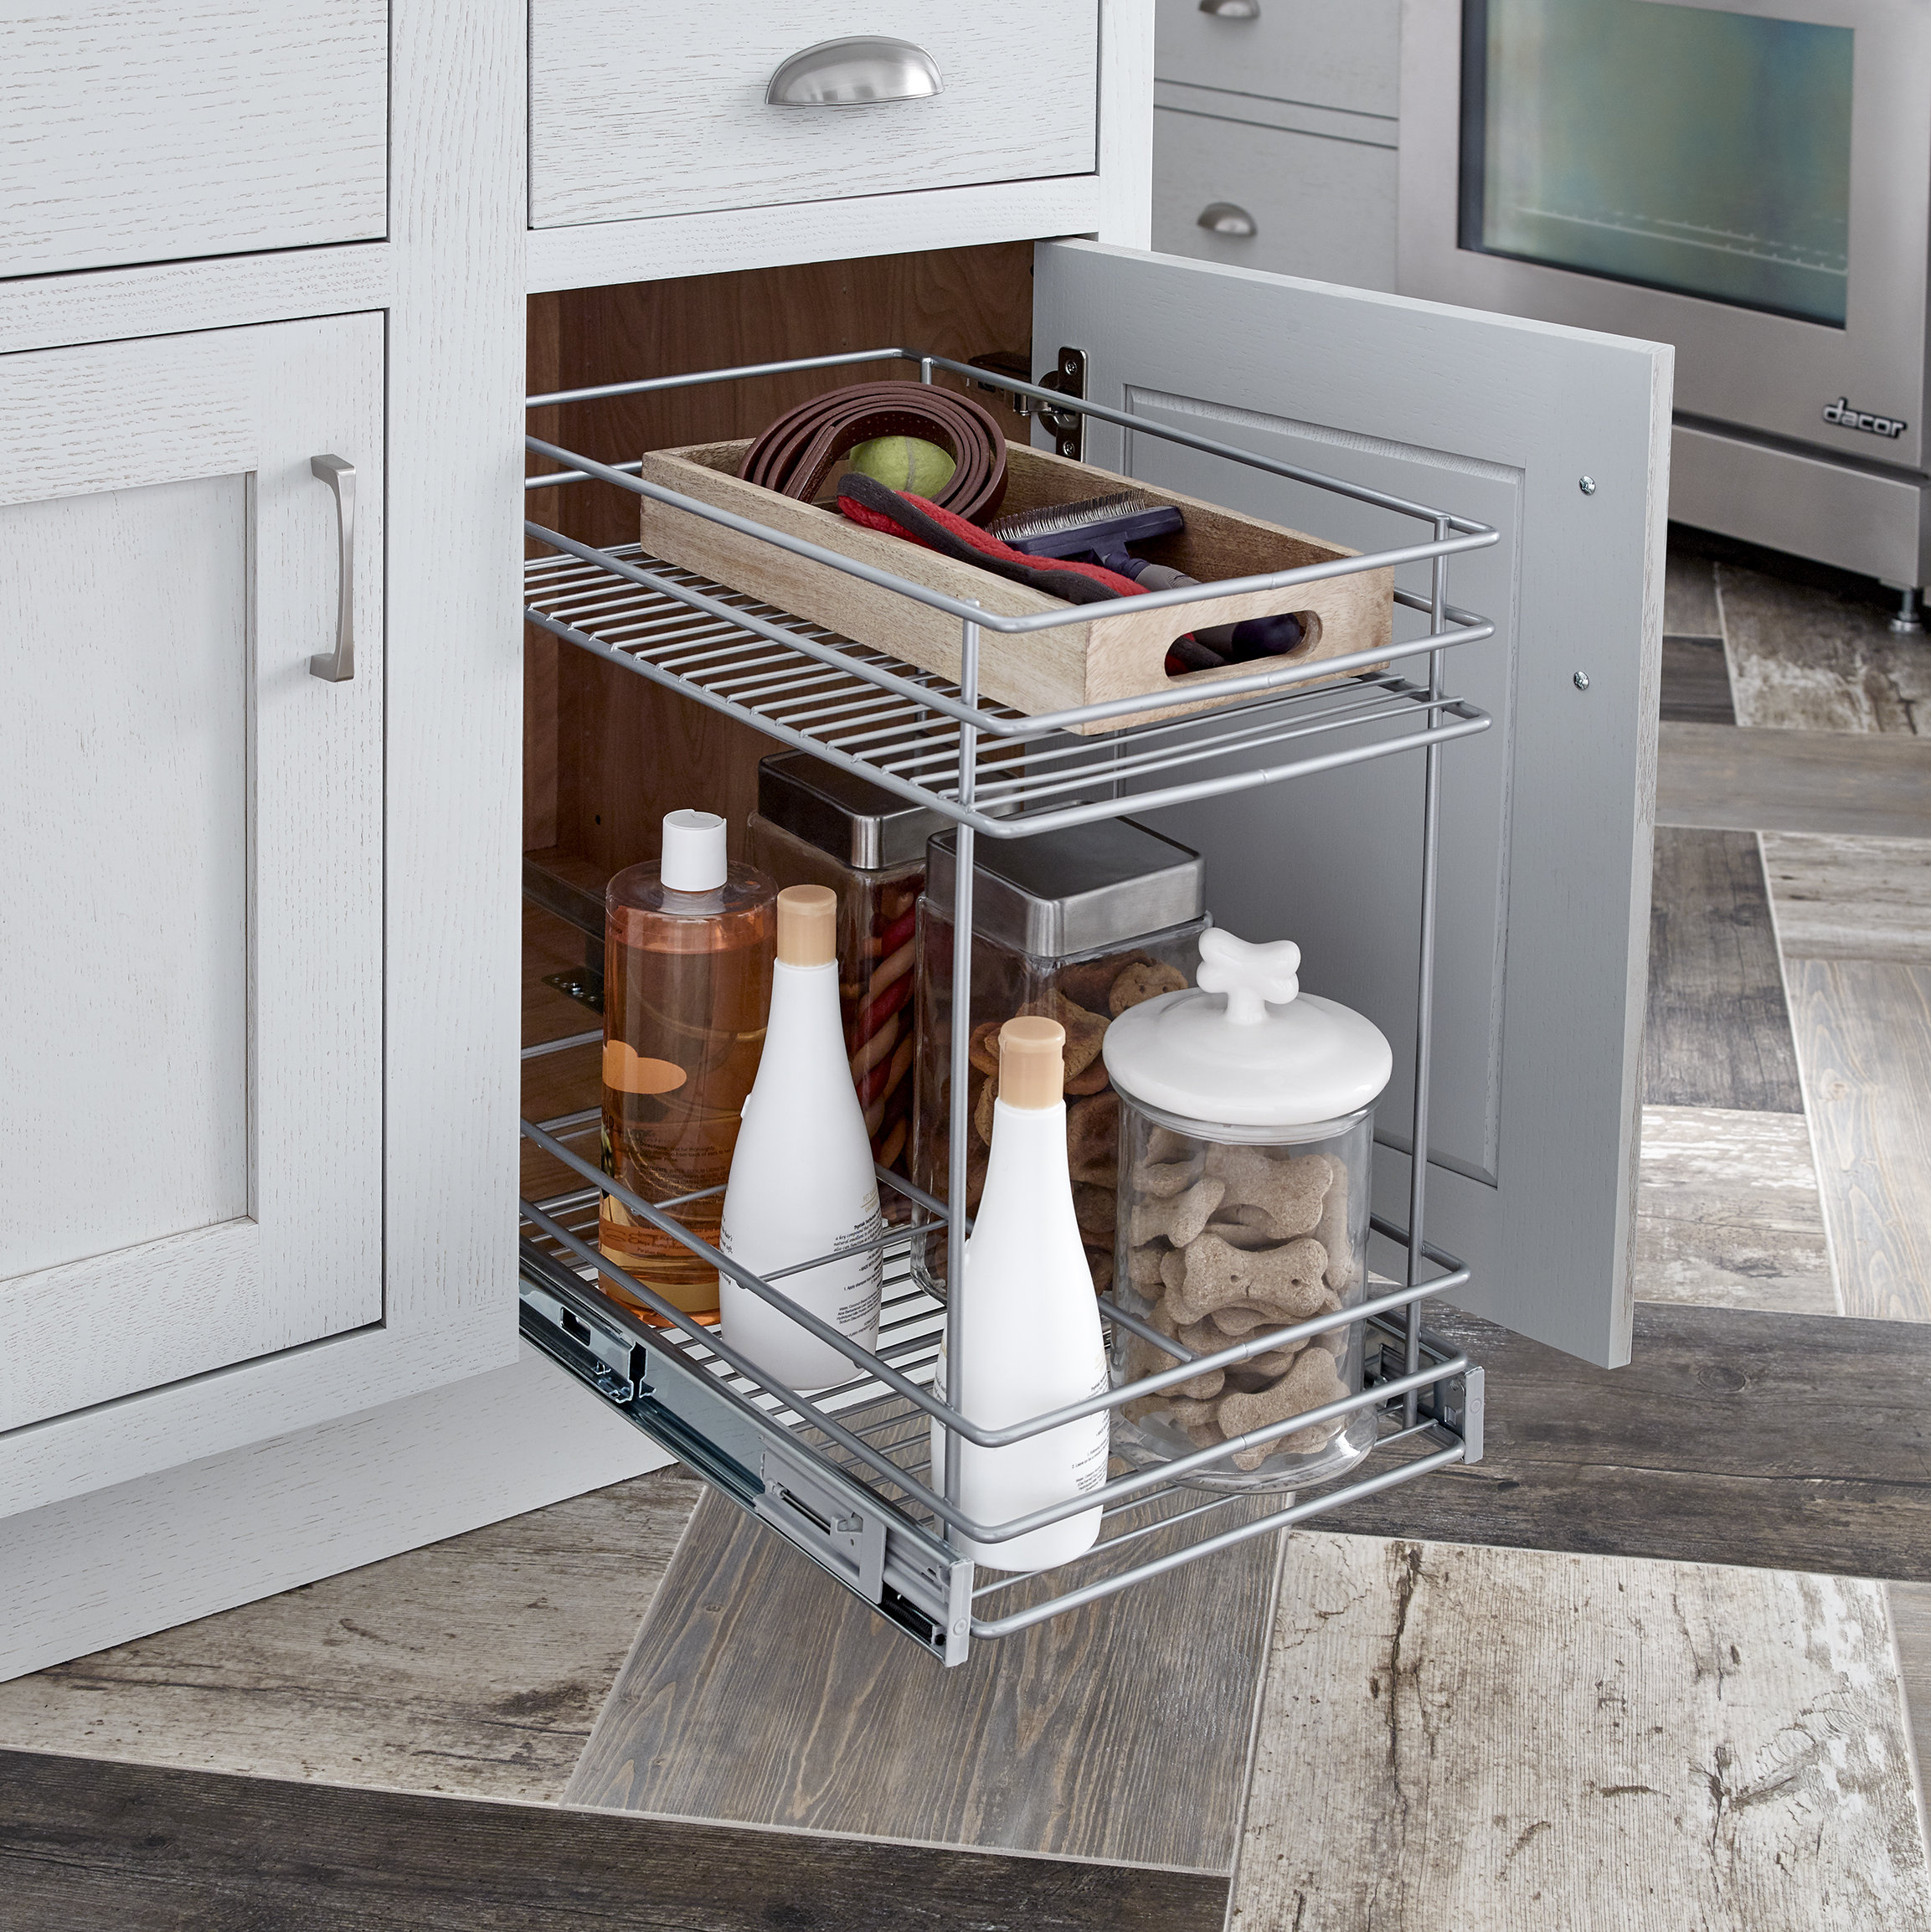 ClosetMaid 14 in. W 2-Tier Ventilated Wire Sliding Cabinet